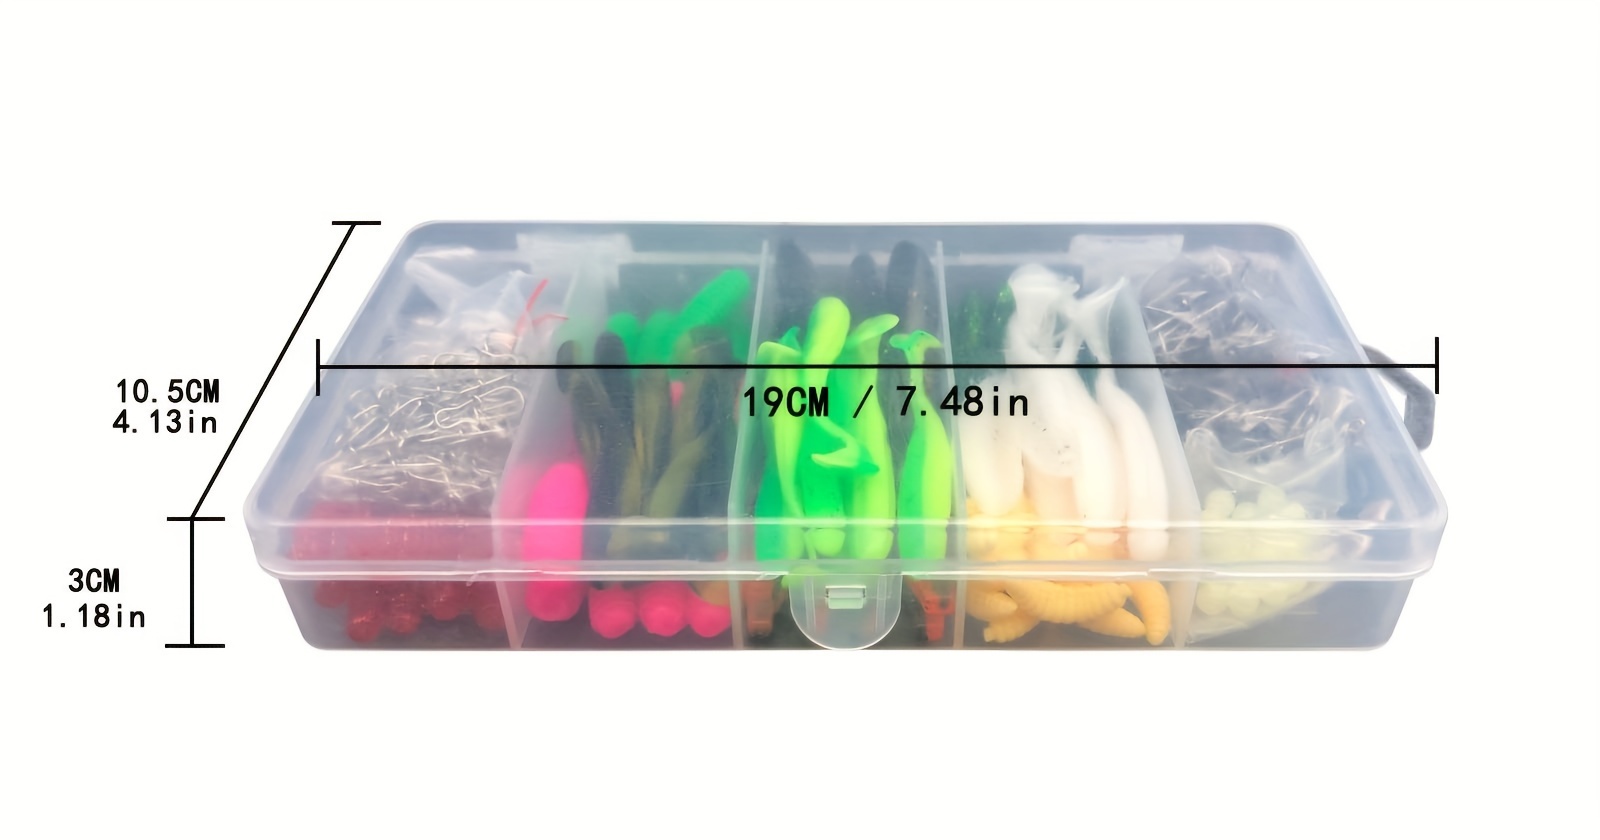 26 107 132 284pcs fishing lures kit tackle box with hard lures spoon lures soft plastic worms swimbaits crankbait jigs hooks for bass trout salmon fishing details 14